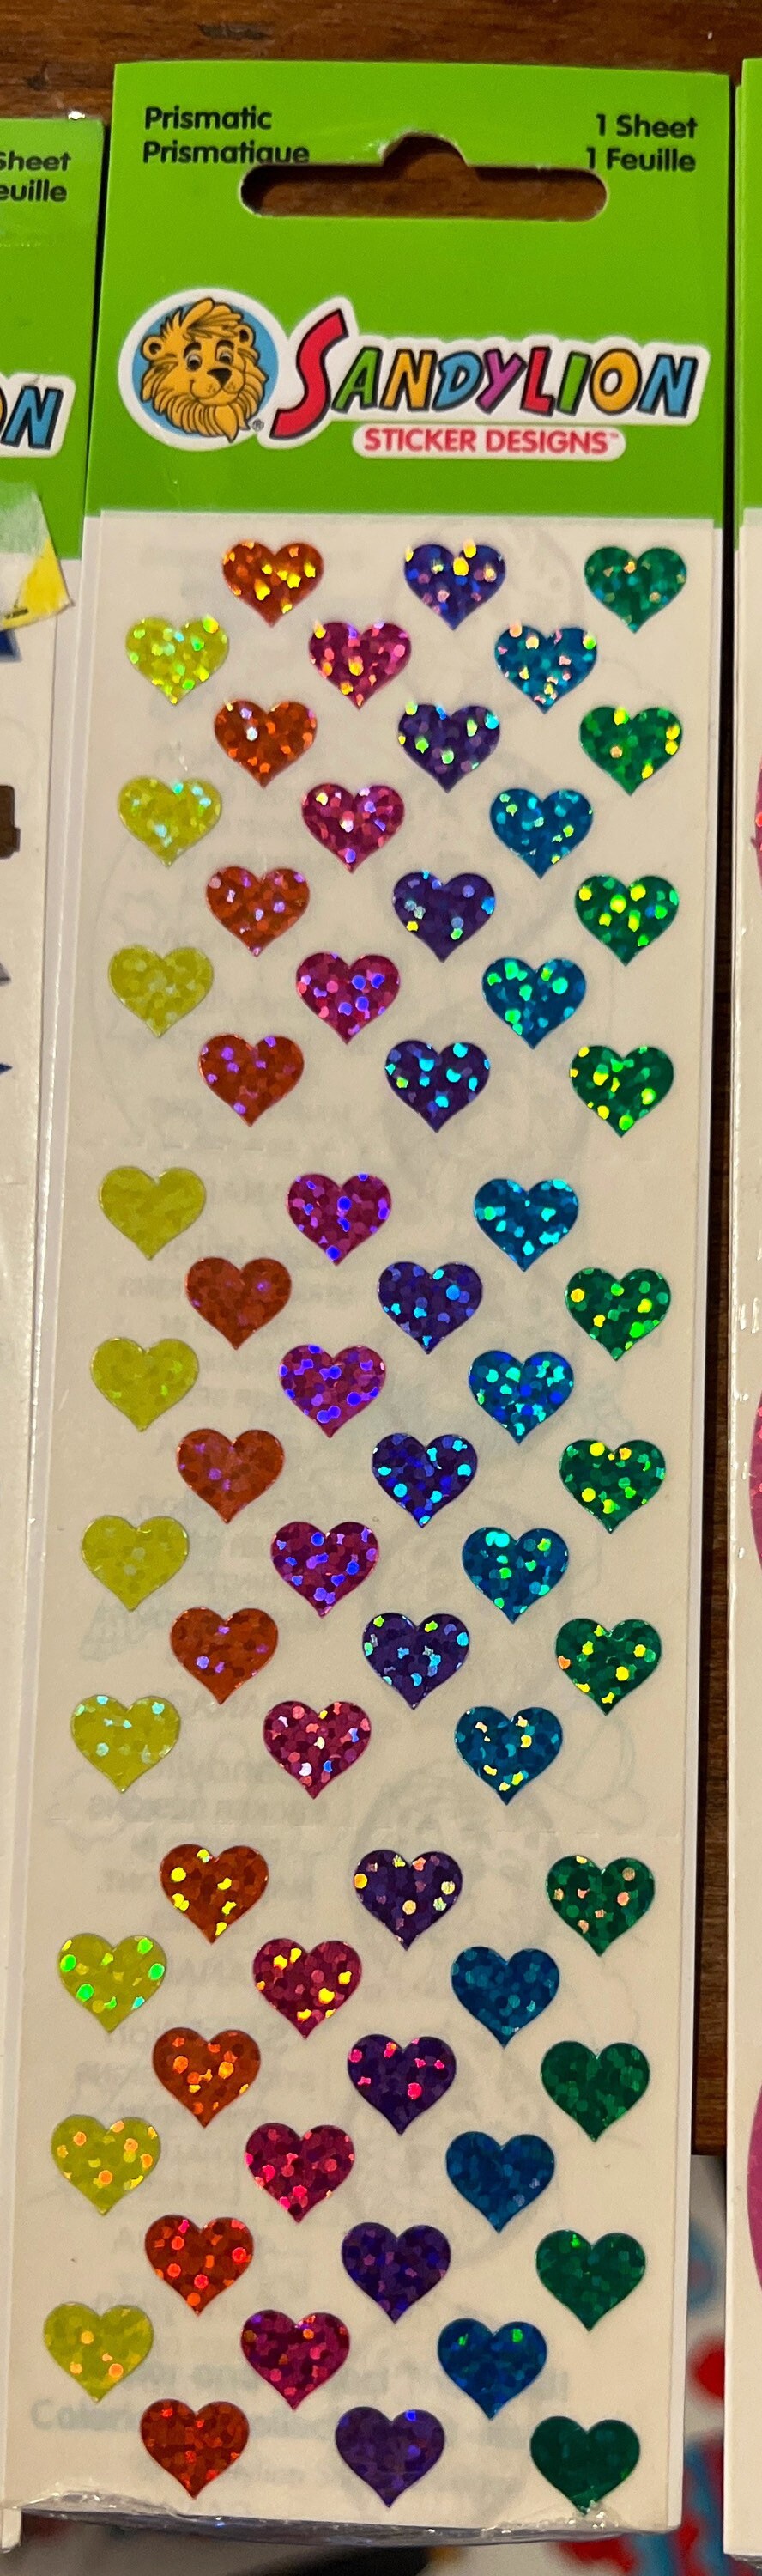 Heart Chain Line Stickers, Polco Chain Deco Stickers, Binder Decal